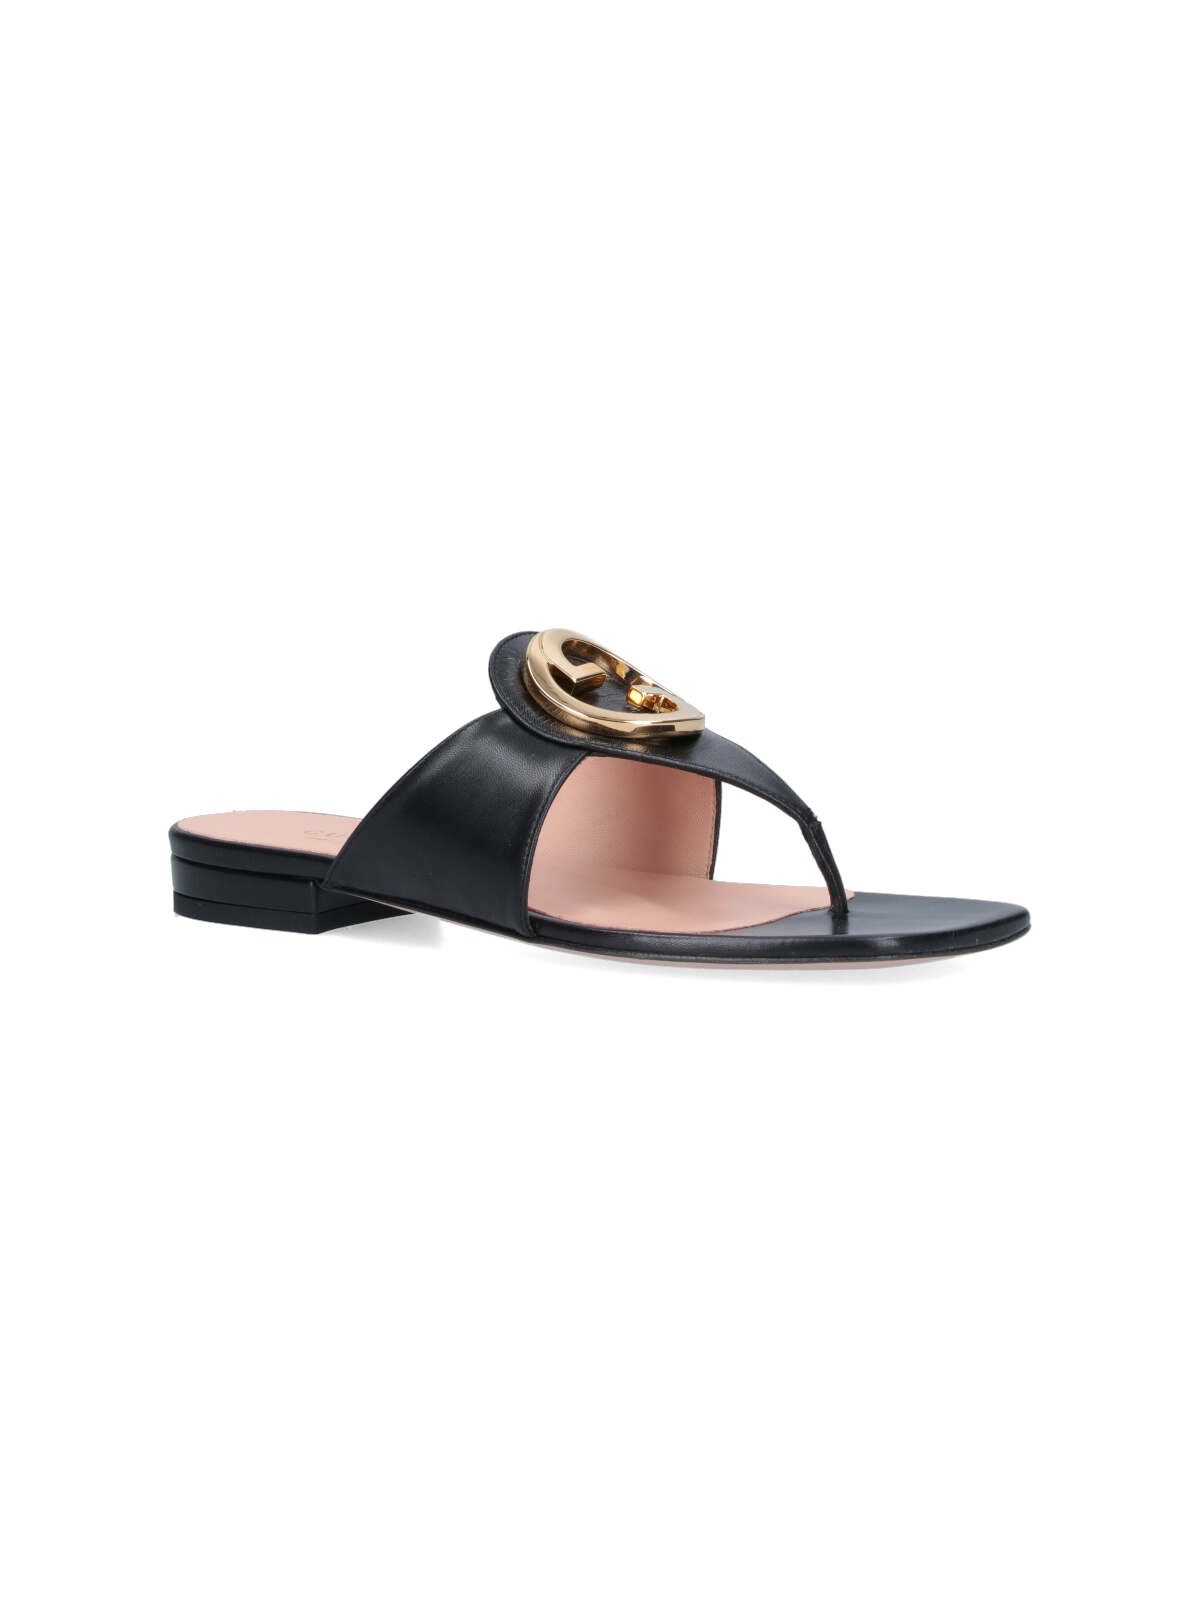 Gucci Leather Thong Sandals | Editorialist